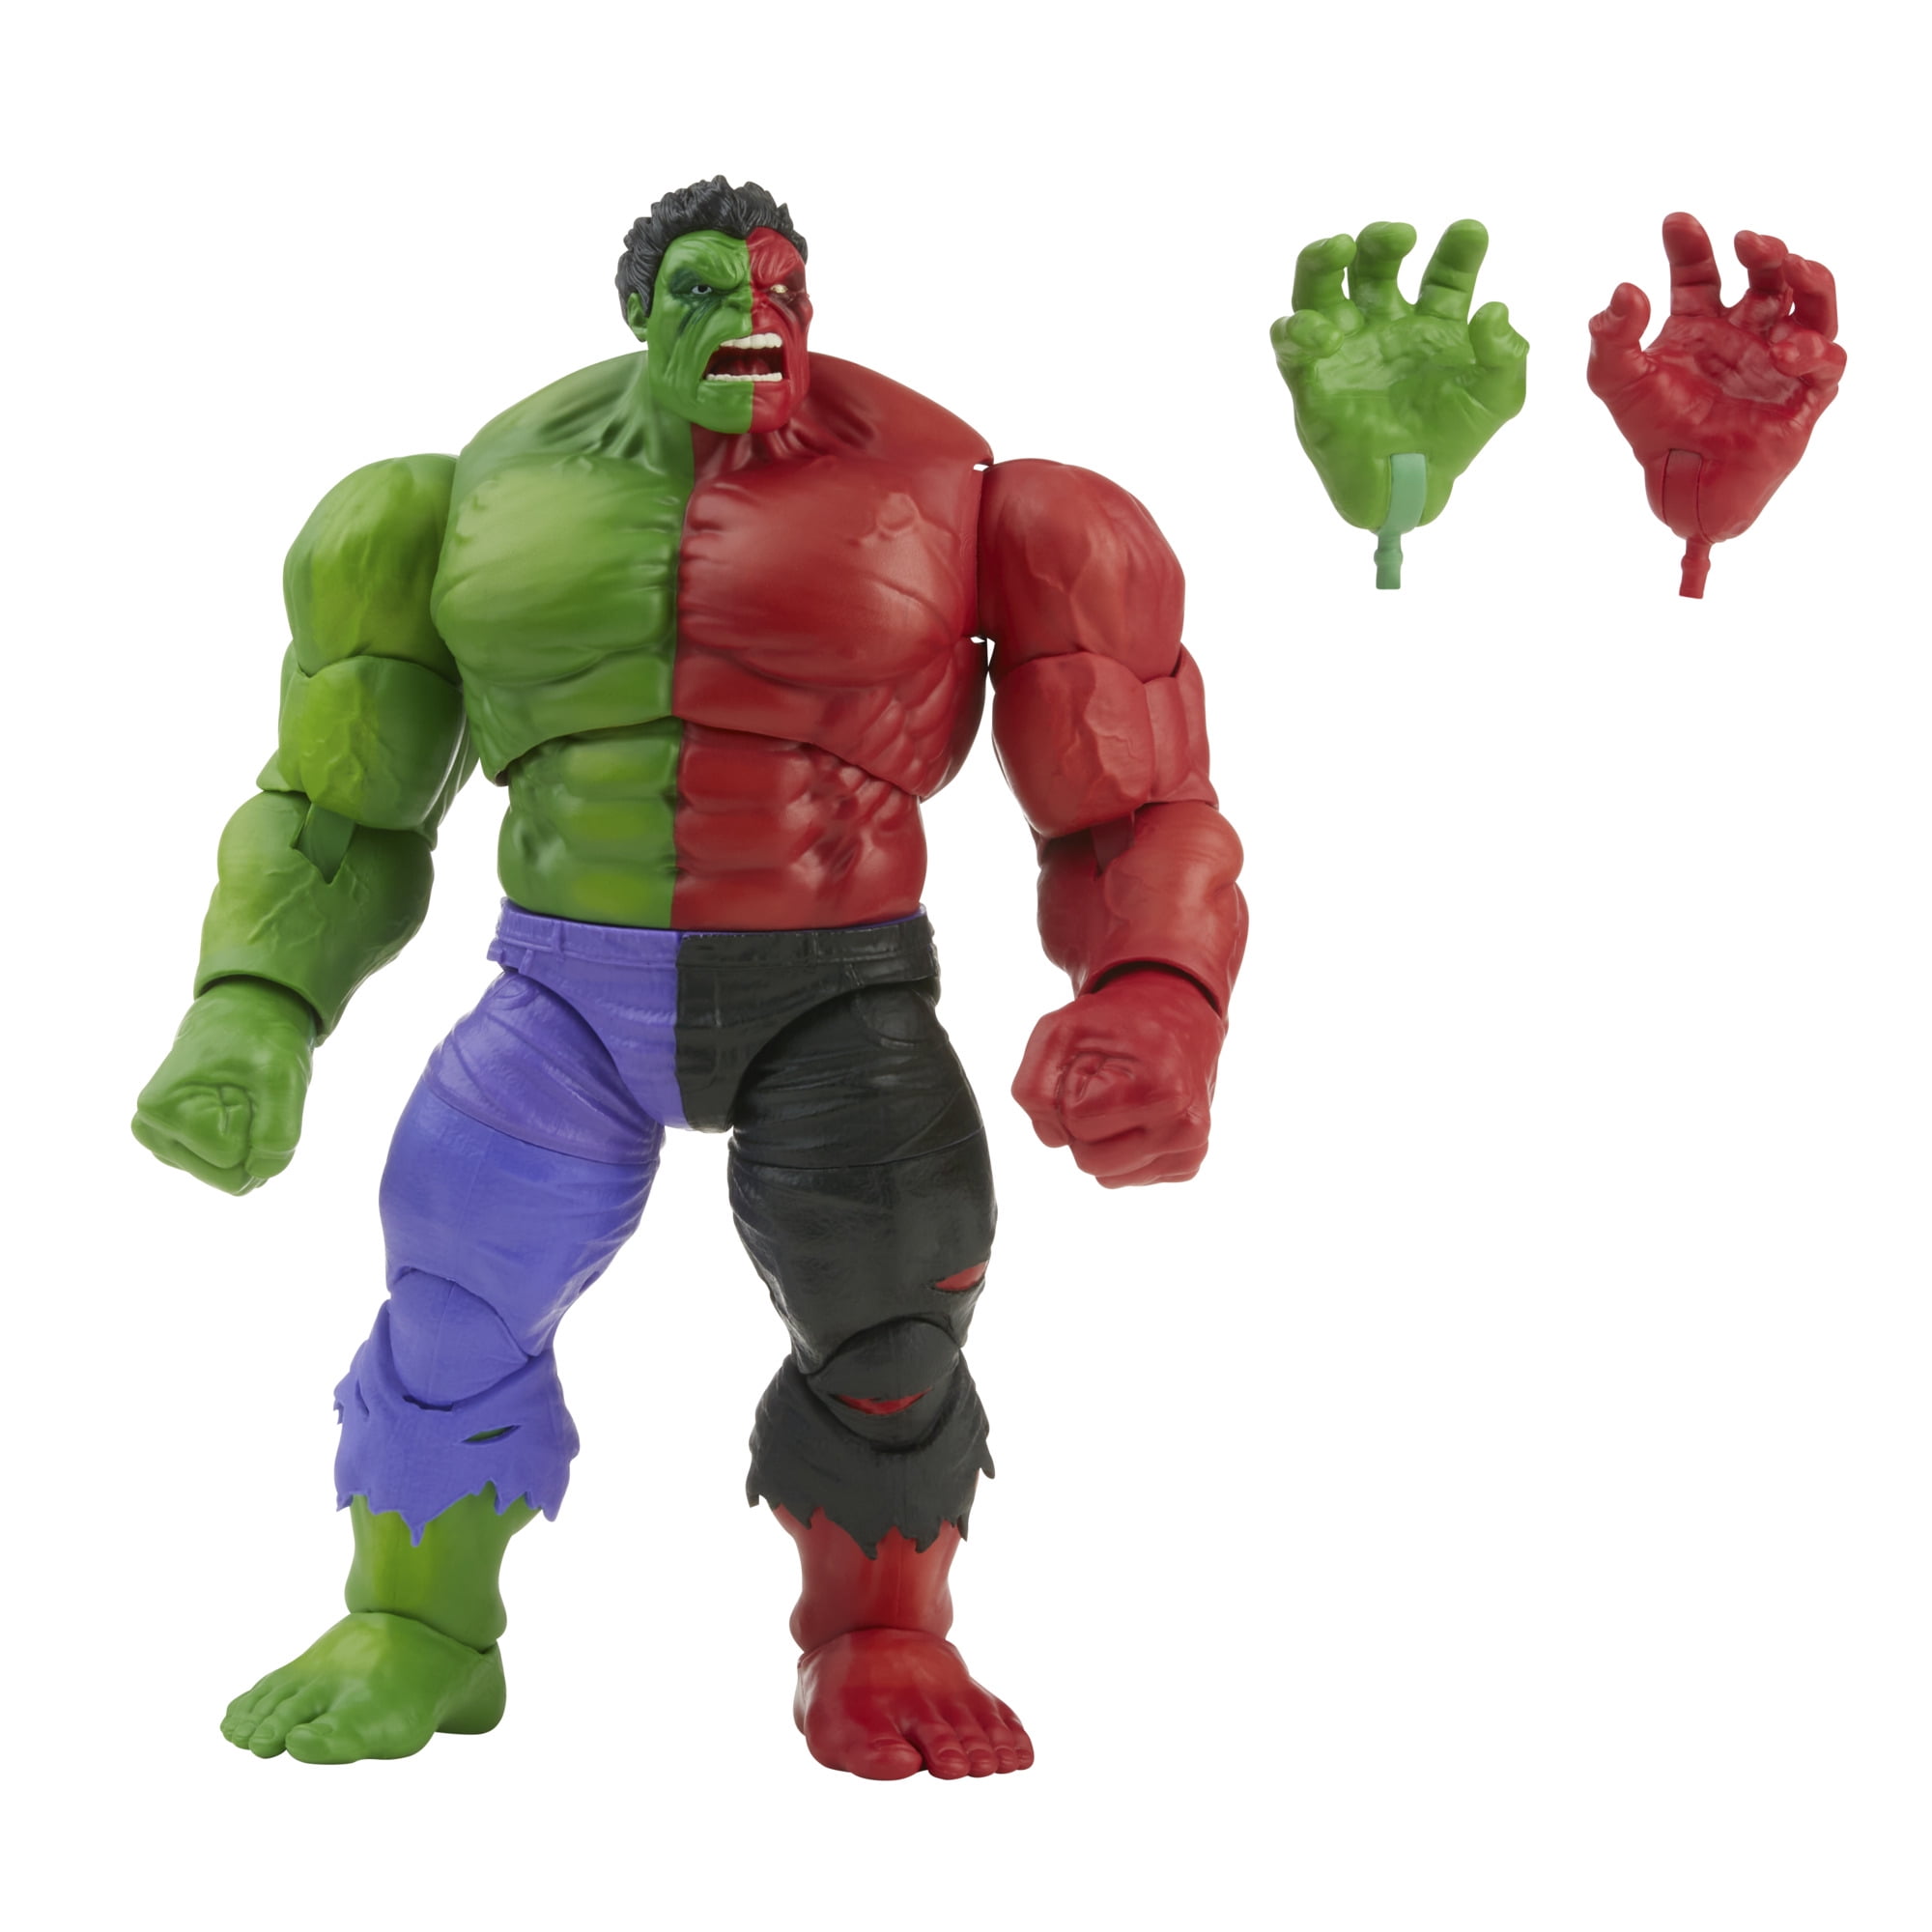 Marvel Universe Comic Exclusive Compound HULK Figure Toy Red Green Model Cosplay 